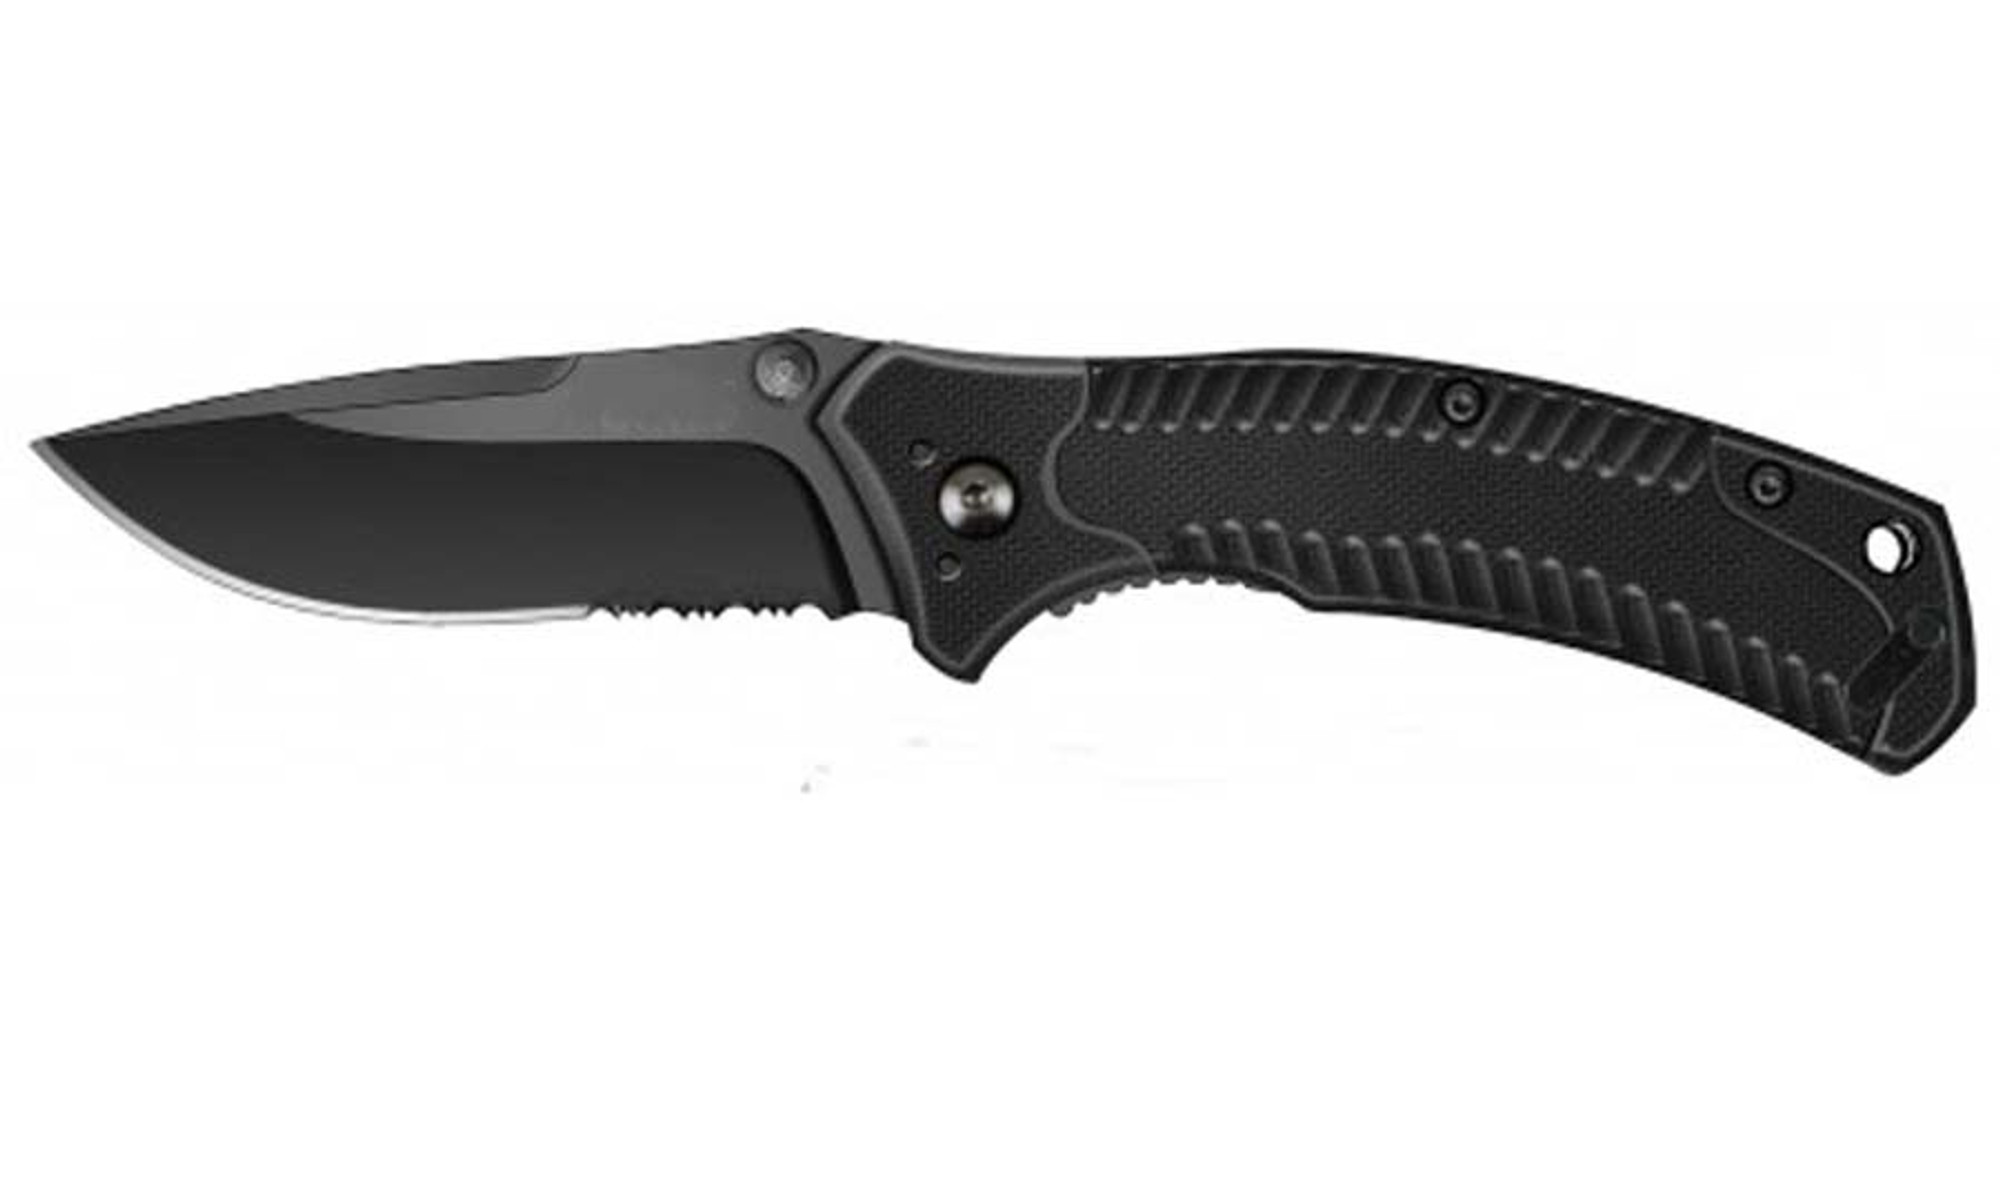 RUKO RK0148B, 440A, 3" Folding Blade Assisted Open Knife, G10 Handle, boxed